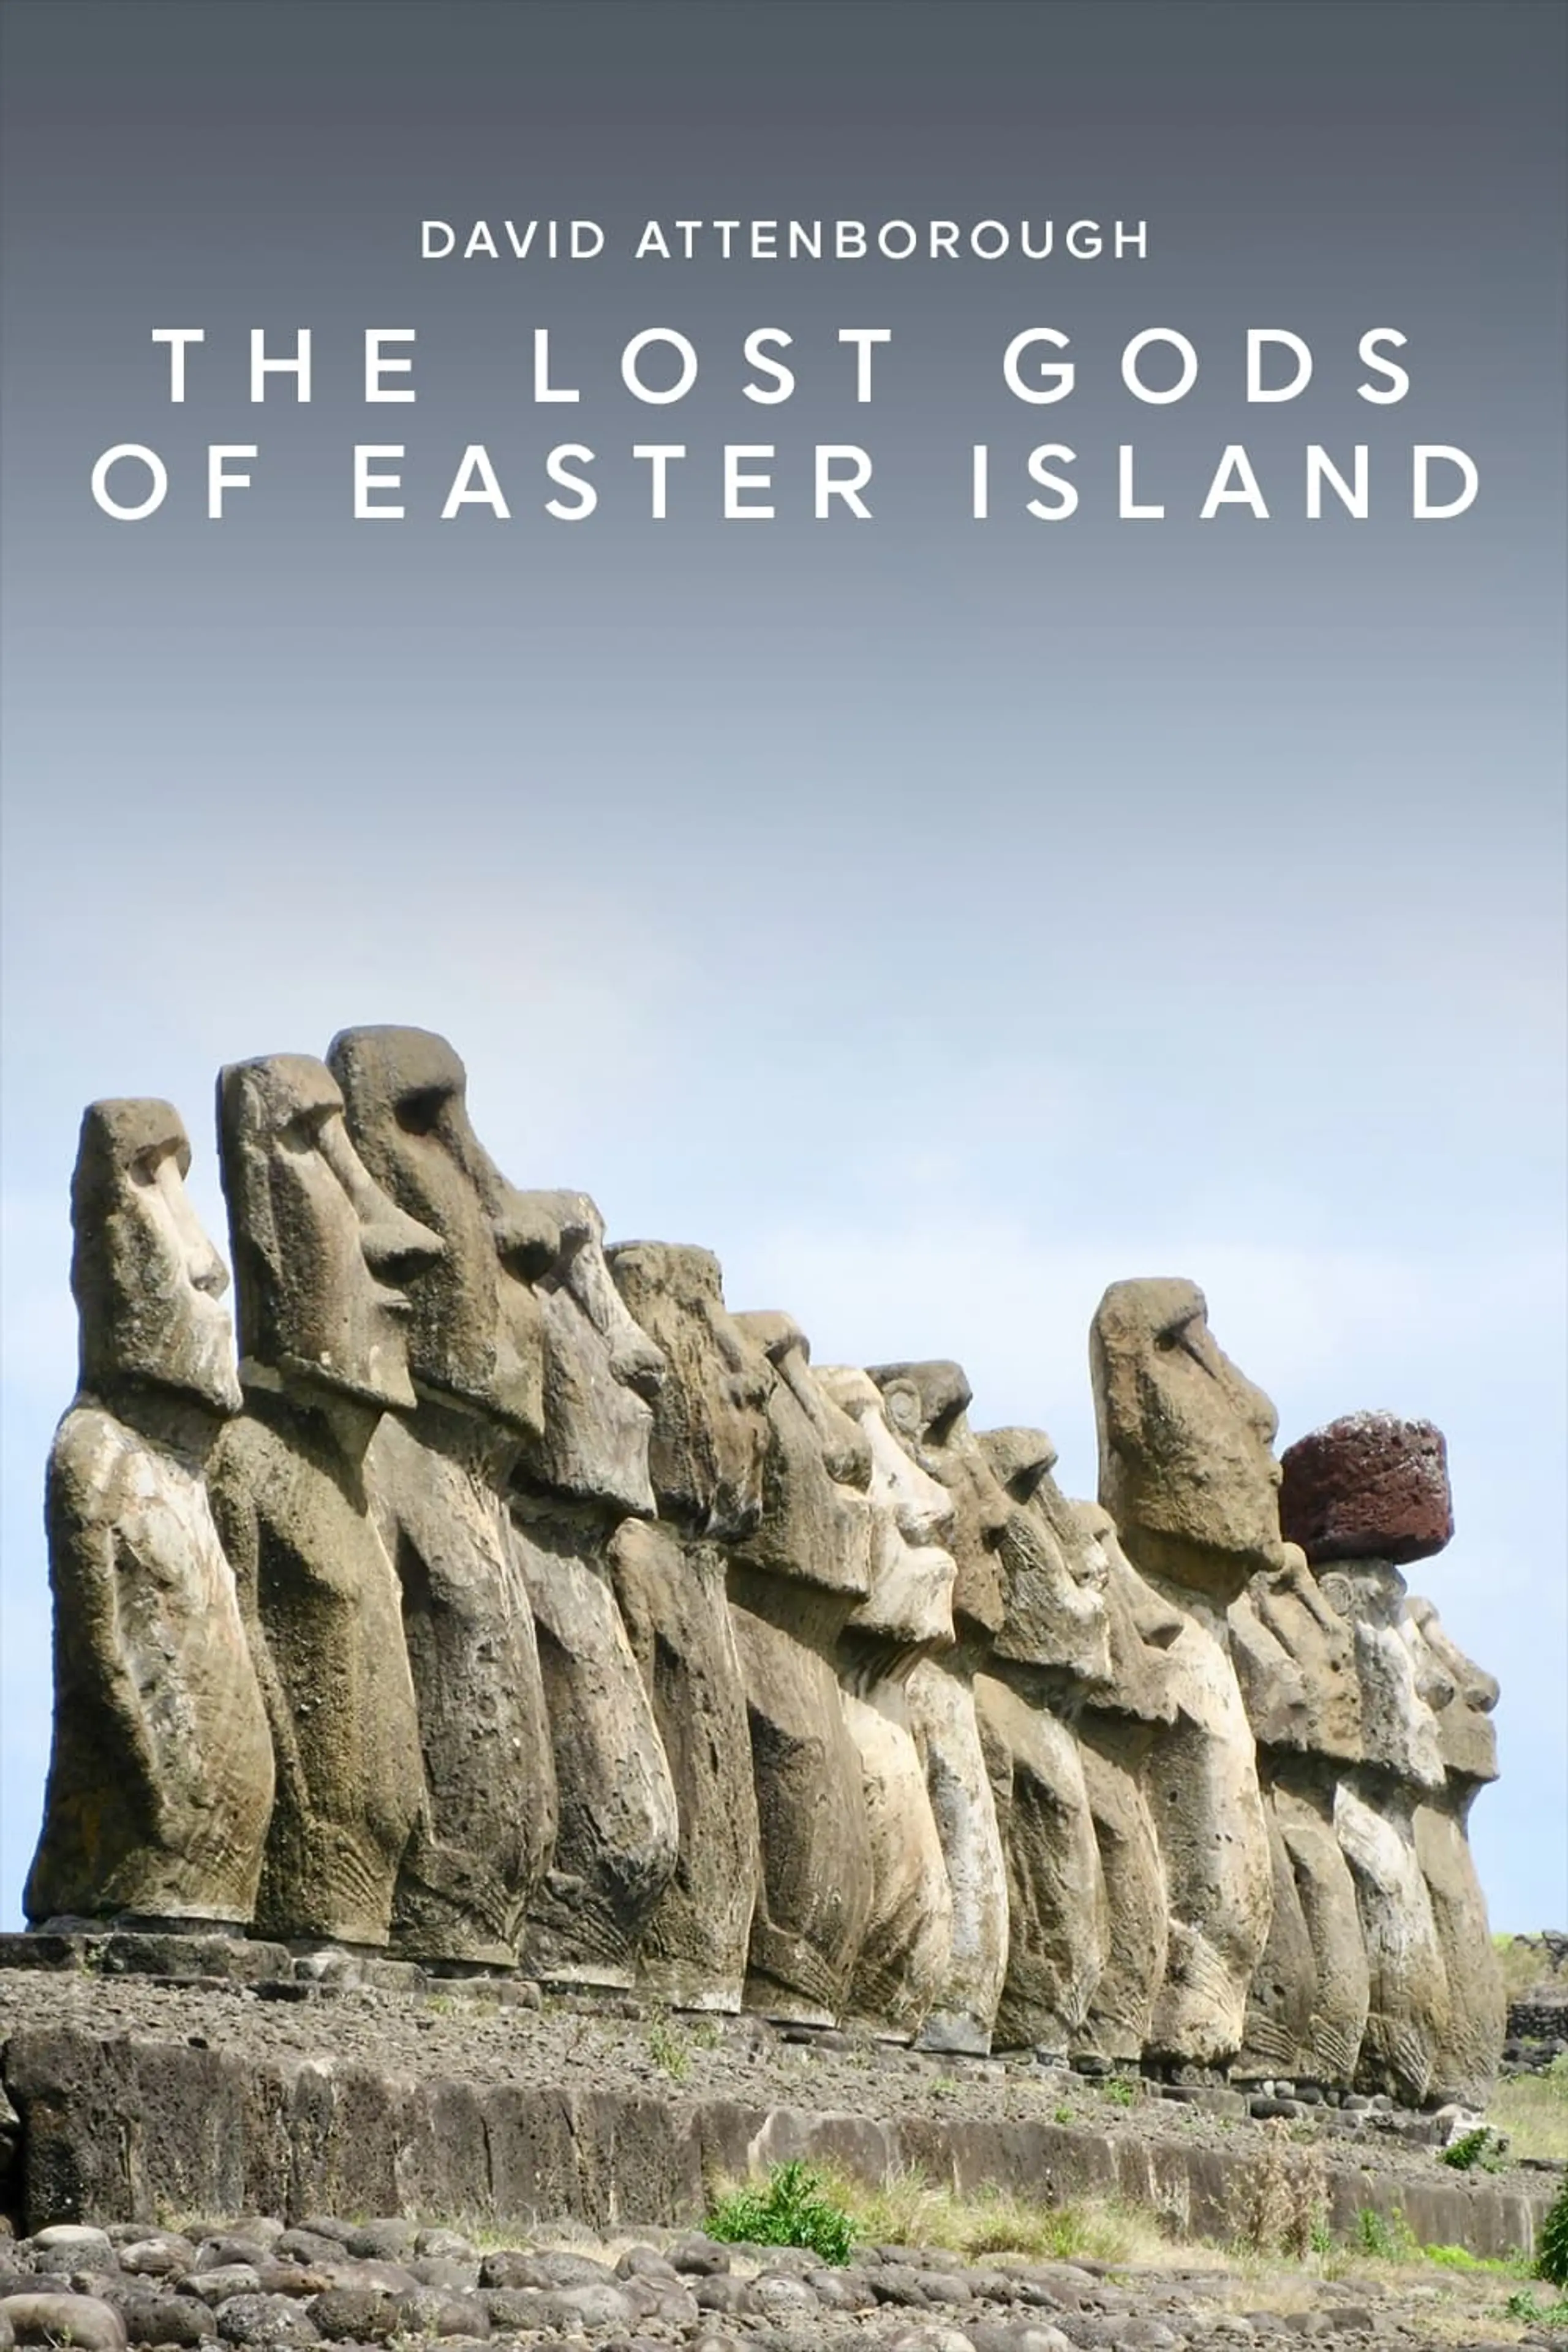 The Lost Gods of Easter Island